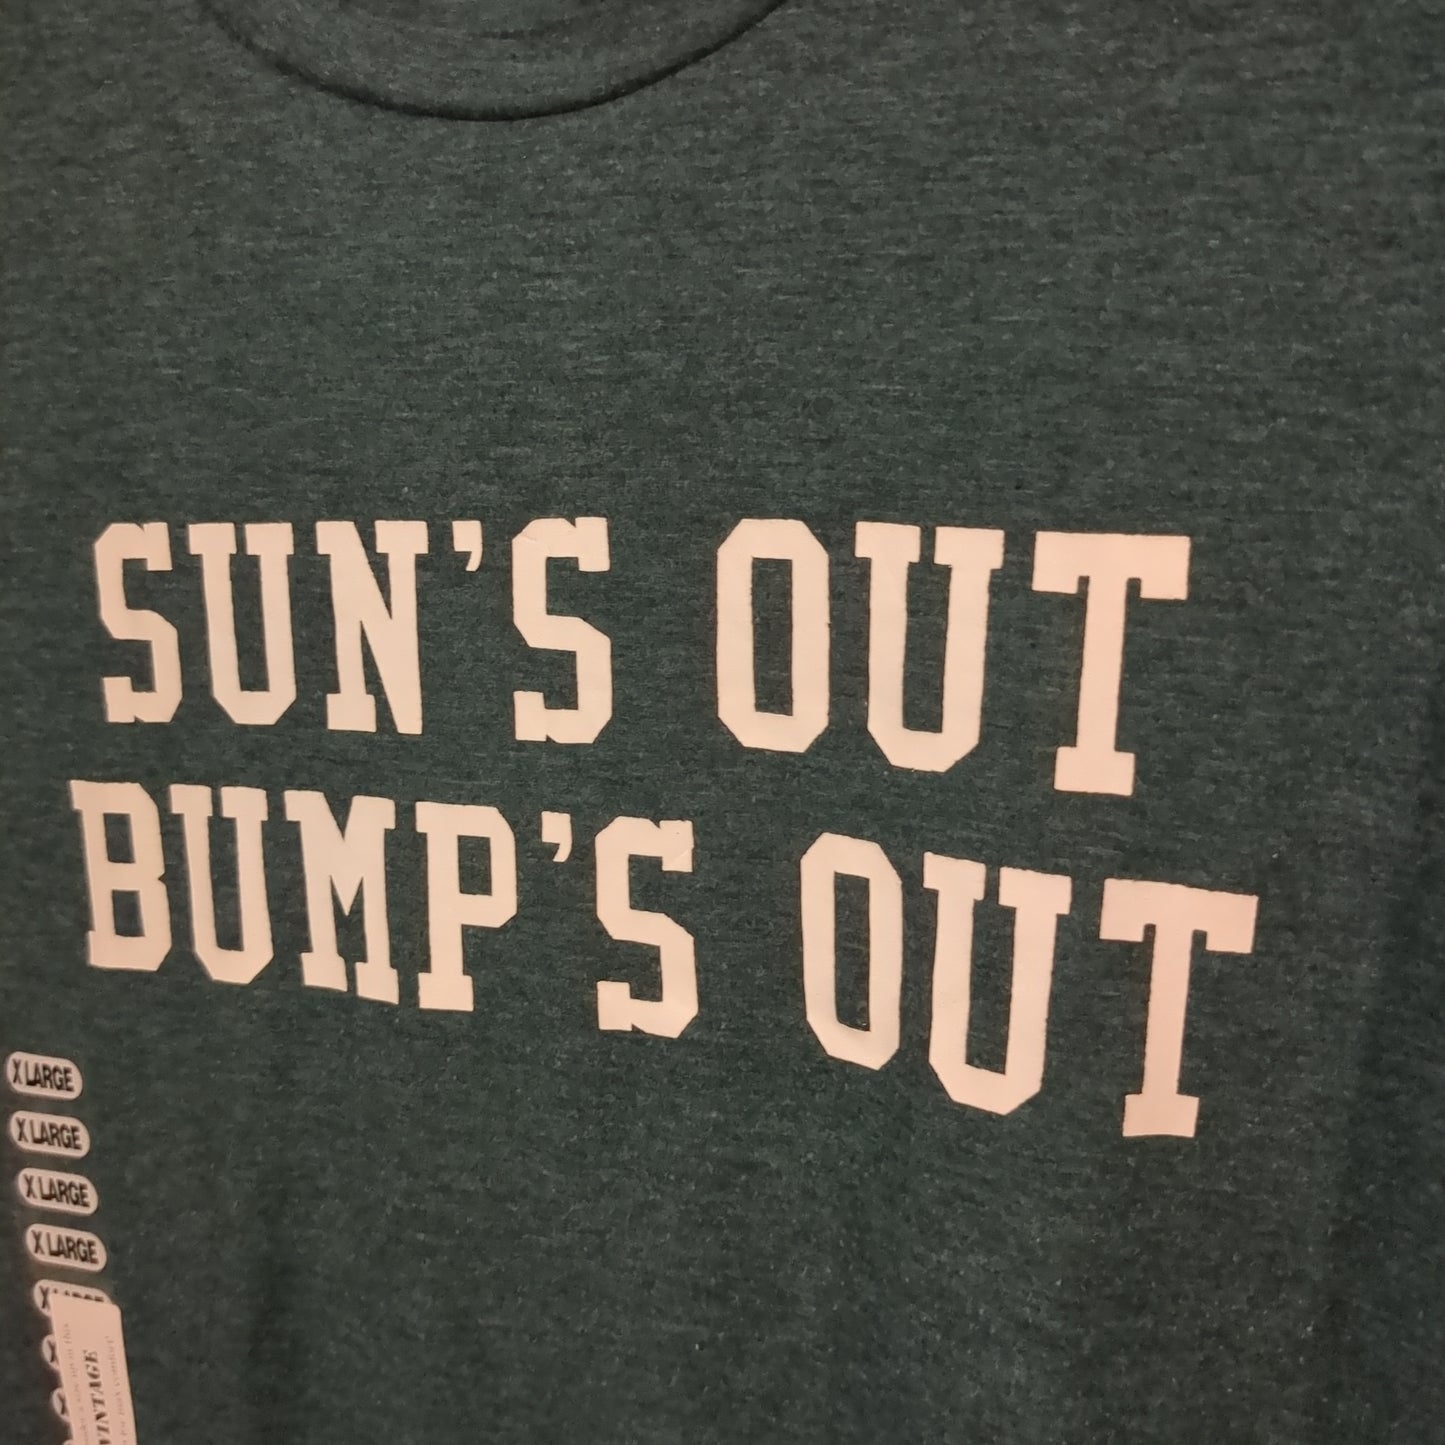 'Sun's out bump's out' graphic boxy SS tee, Teal